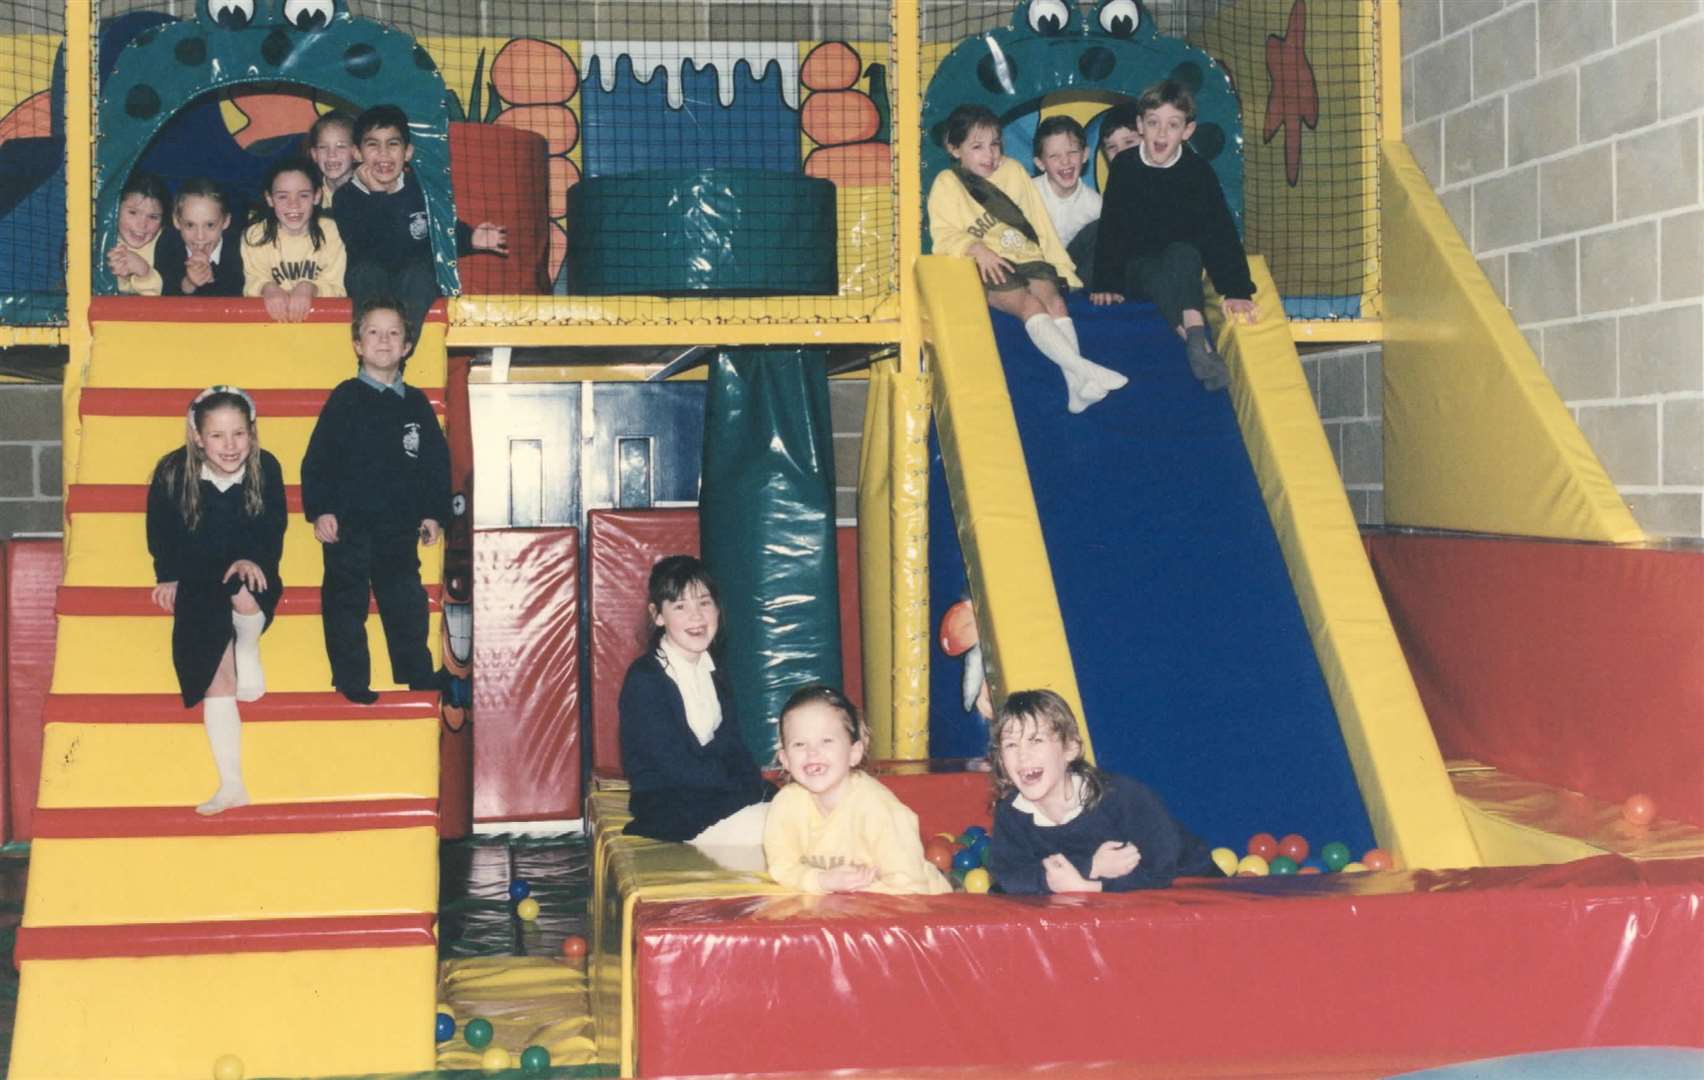 Youngsters having fun at Cygnet Leisure Centre in Gravesend in 1993